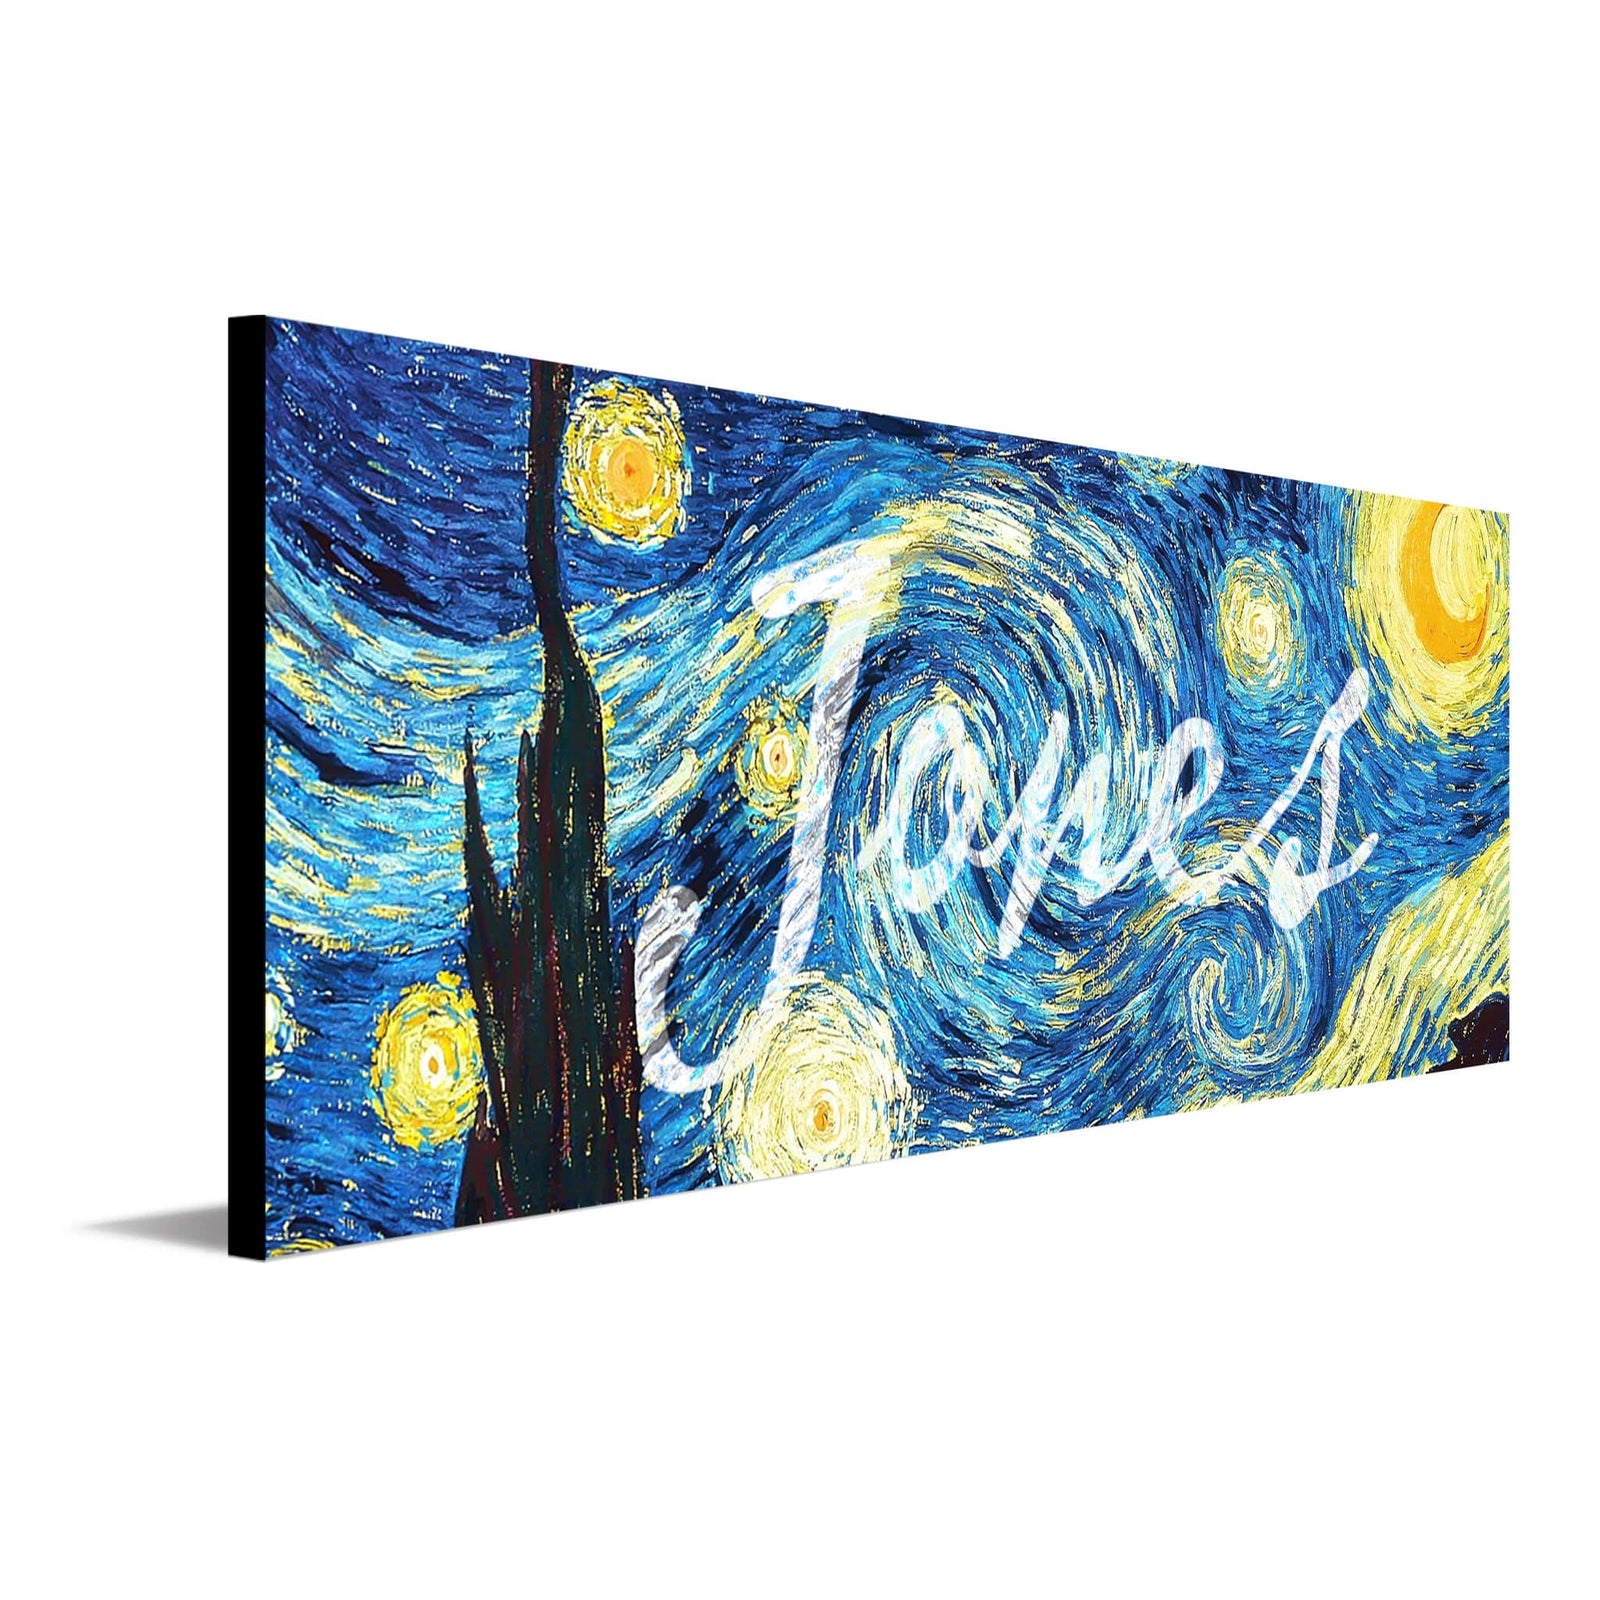 Starry Night Color Your Own Pouch – Coloring Your Own